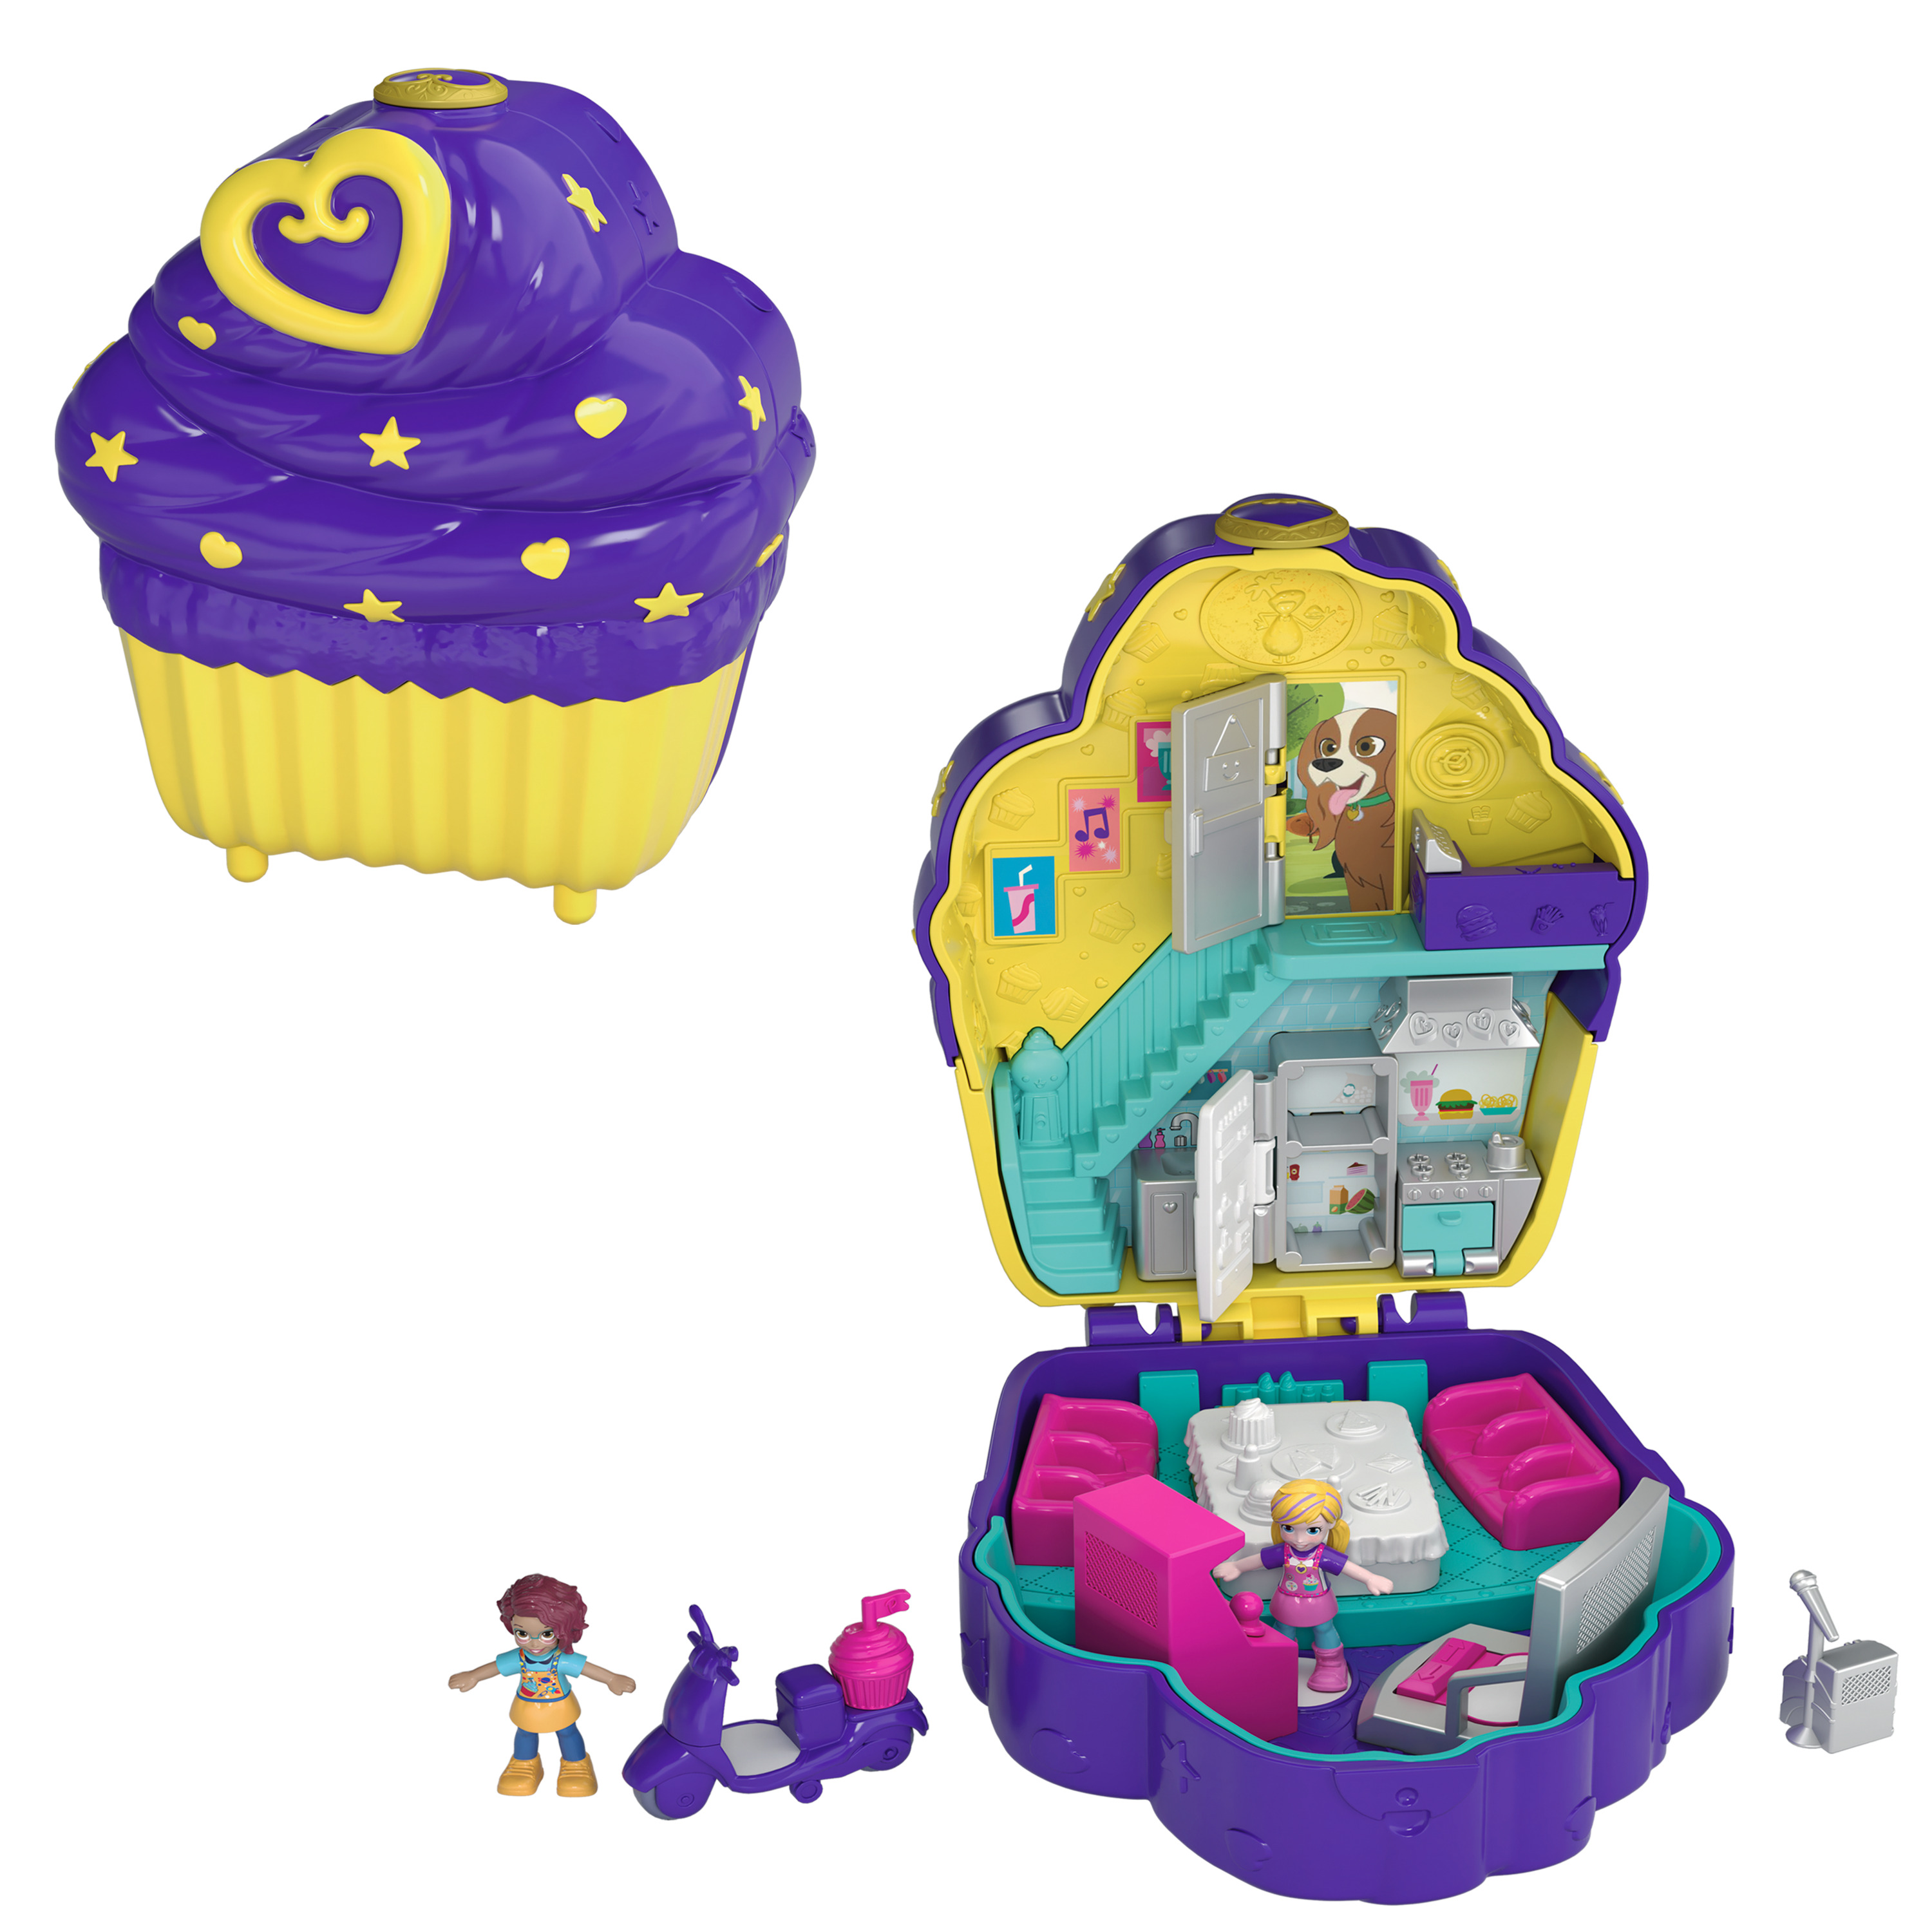 Polly Pocket Pocket Sweet Treat Cupcake Cafe-Themed Compact with Dolls - image 1 of 8